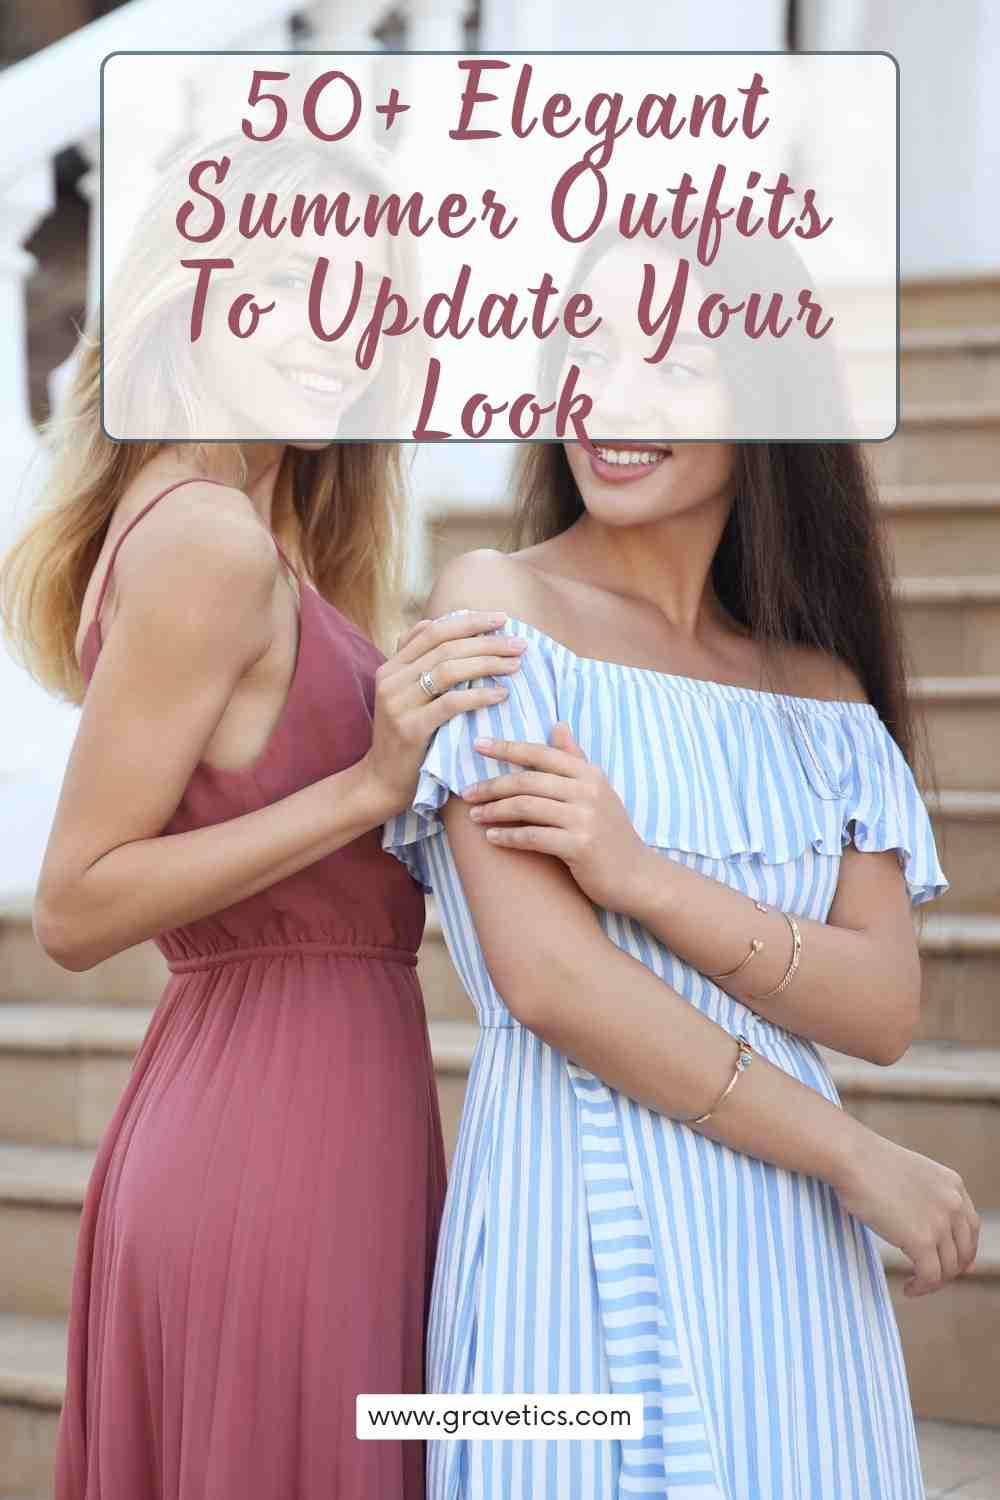 50+ Elegant Summer Outfits To Update Your Look